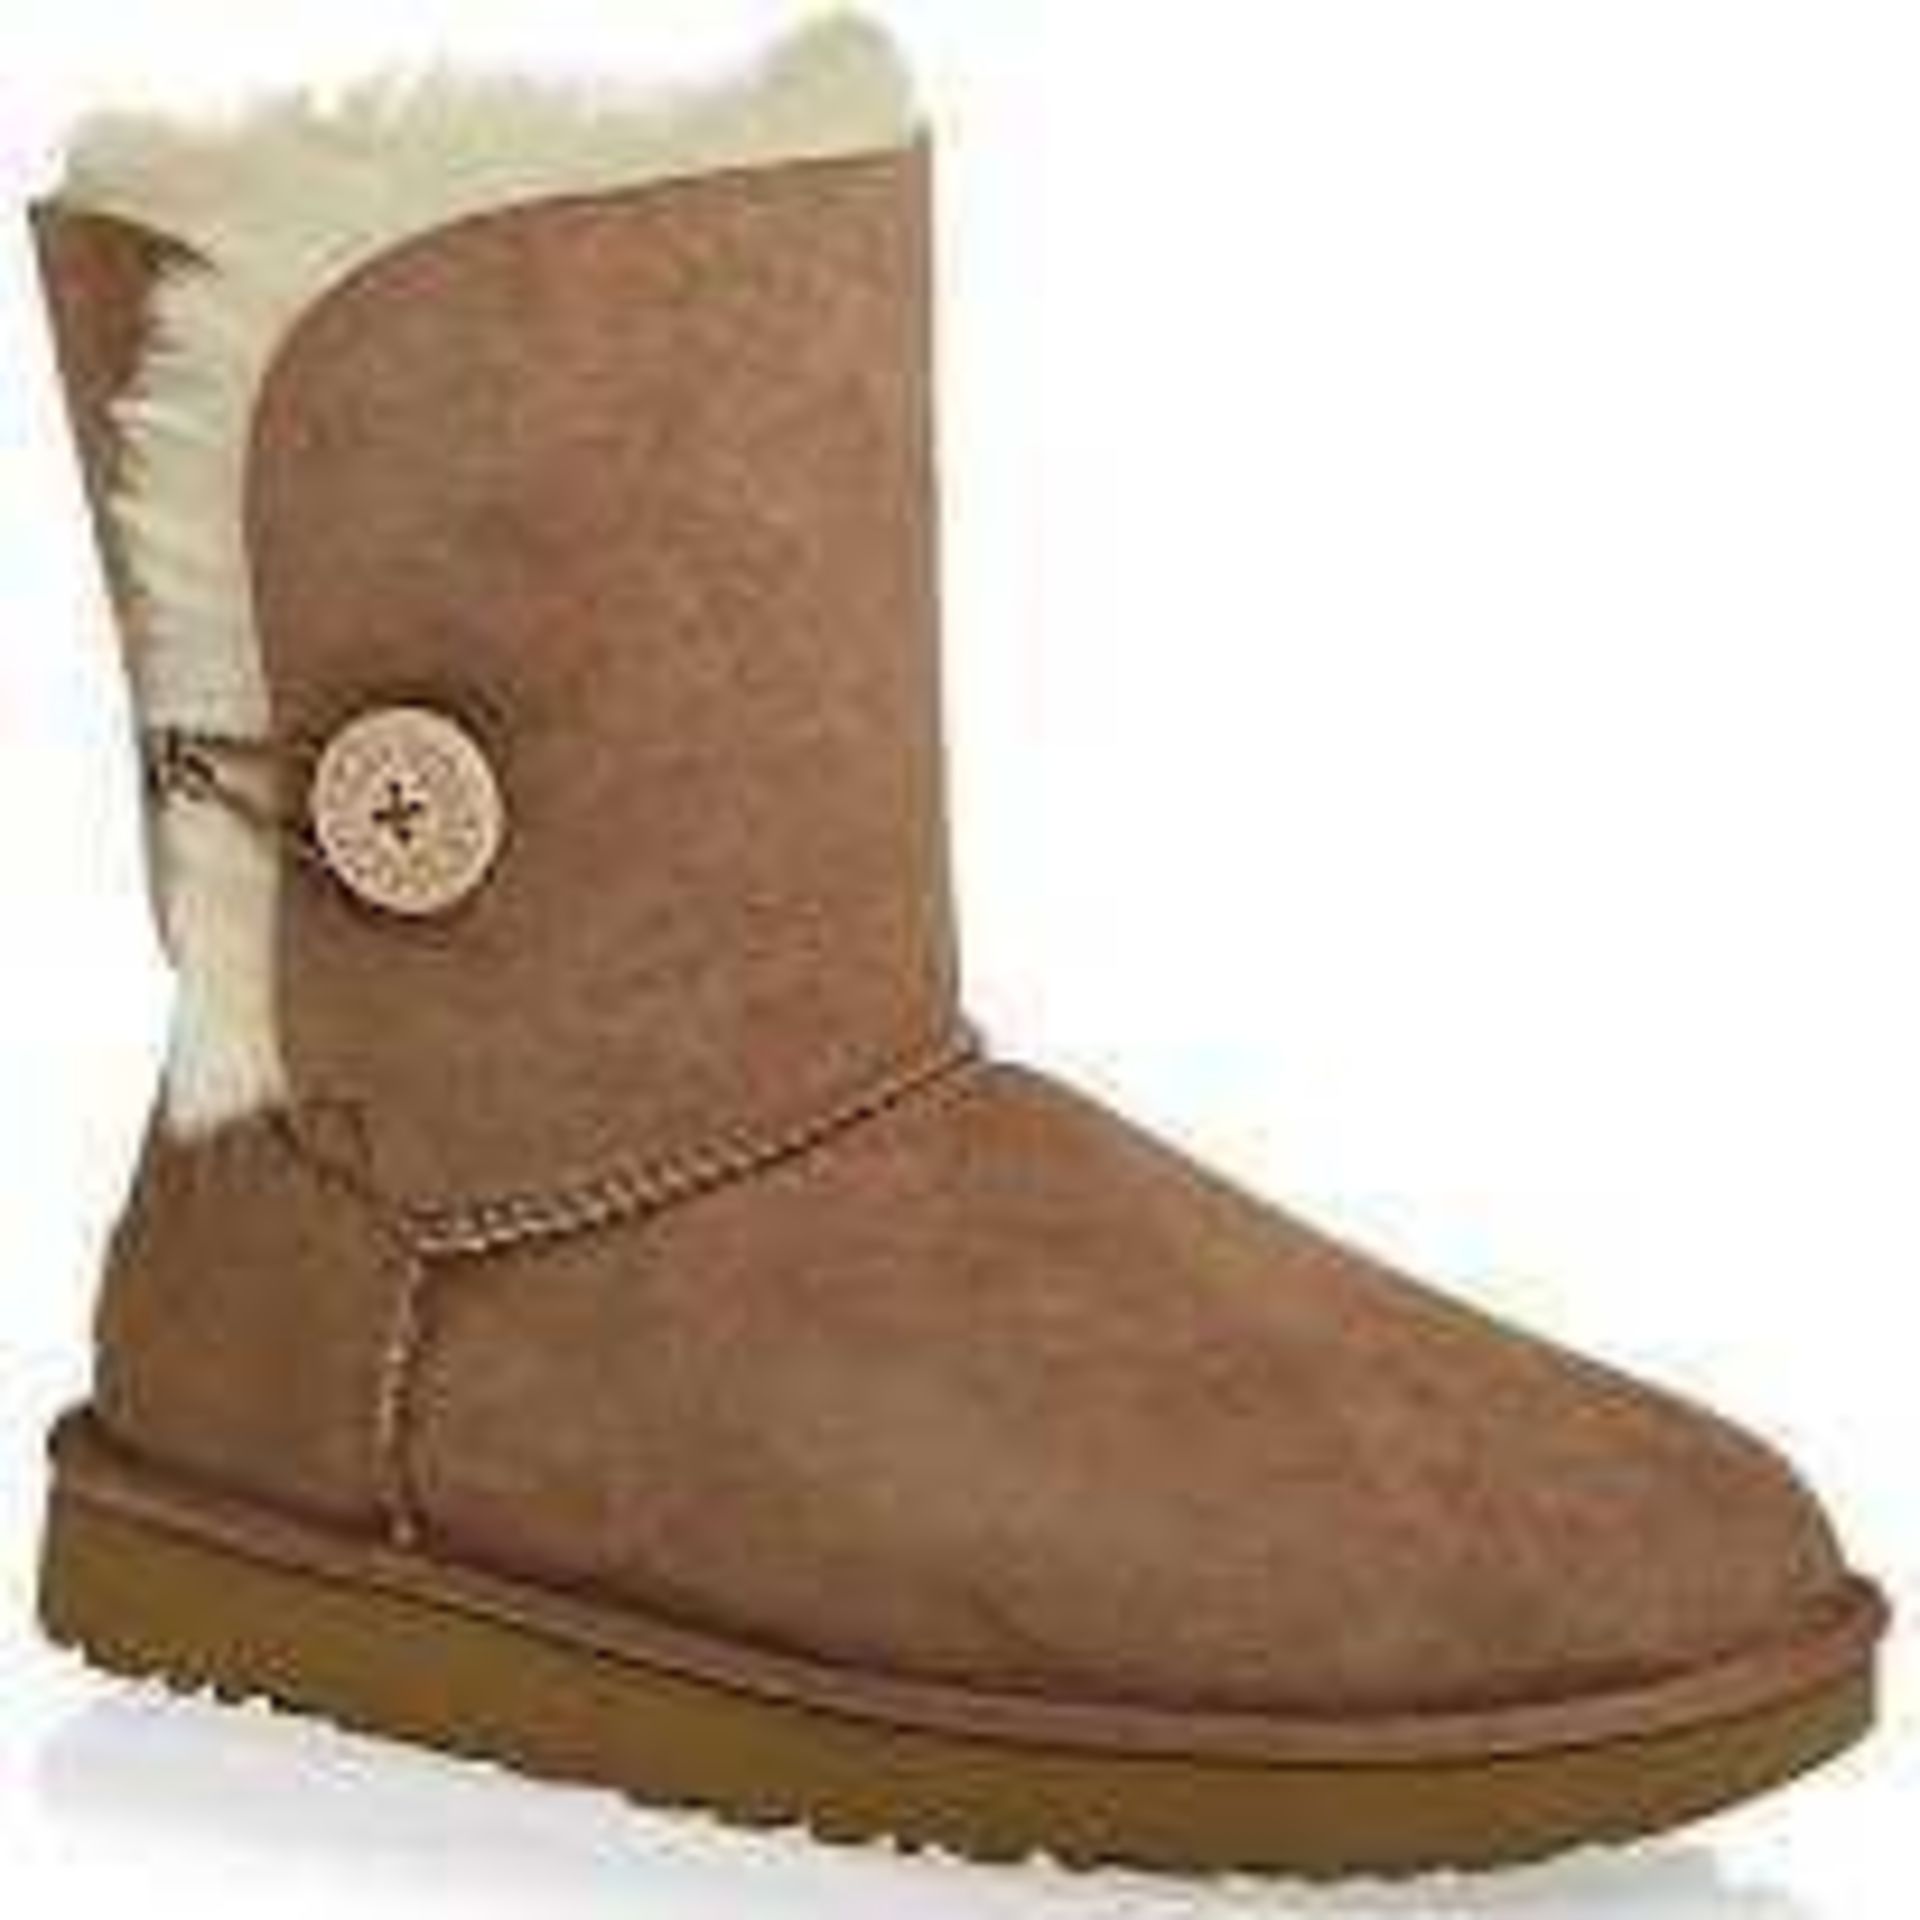 RRP £175 Boxed Ugg K Bailey Button Size Uk 2 Ugg Boots 2.141 (Appraisals Available On Request) (